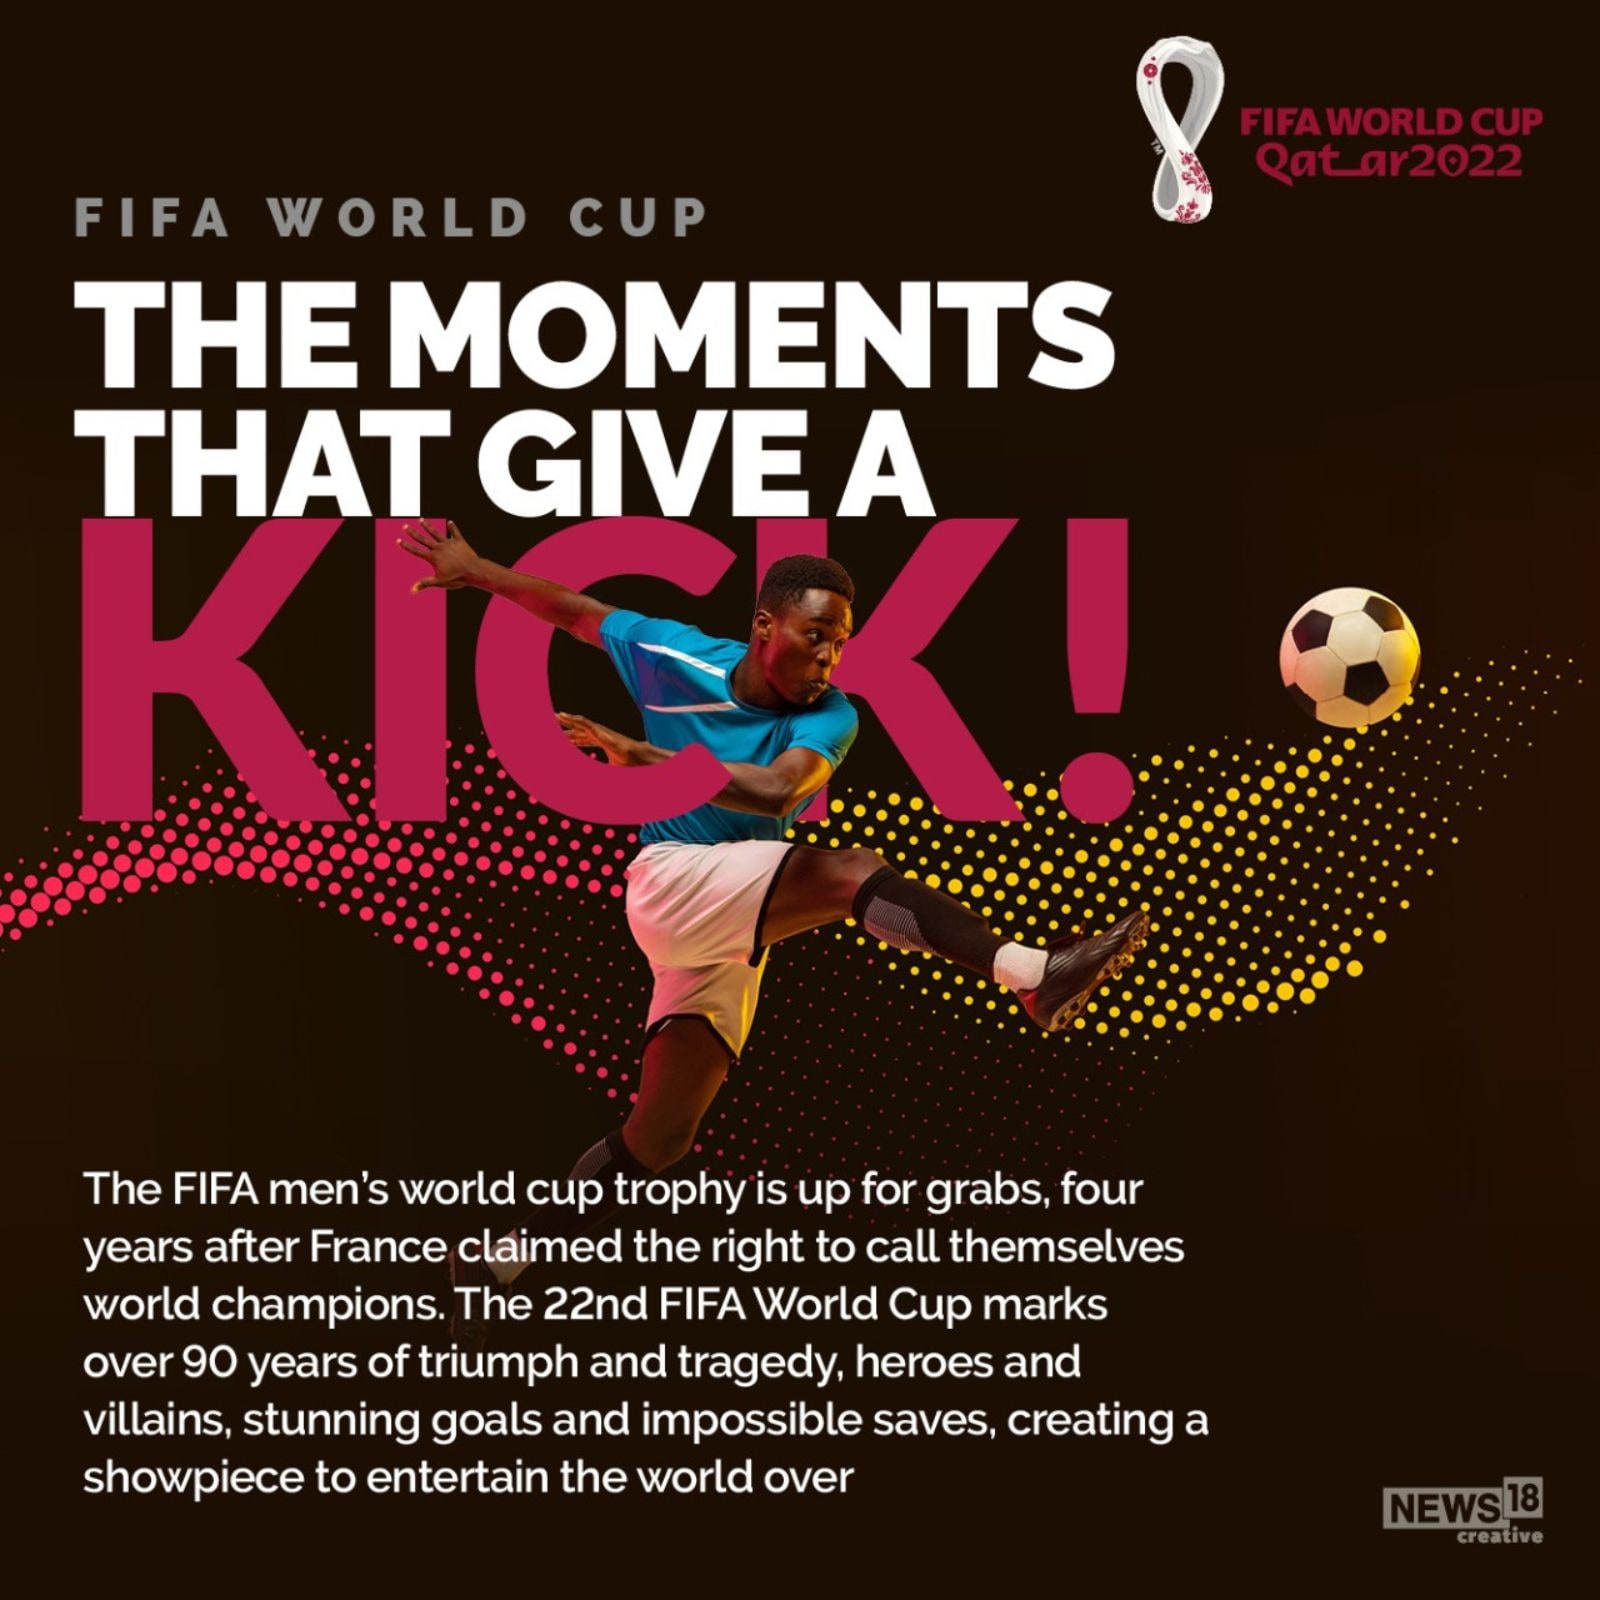 FIFA World Cup The Moments That Give a Kick to All Football Fans